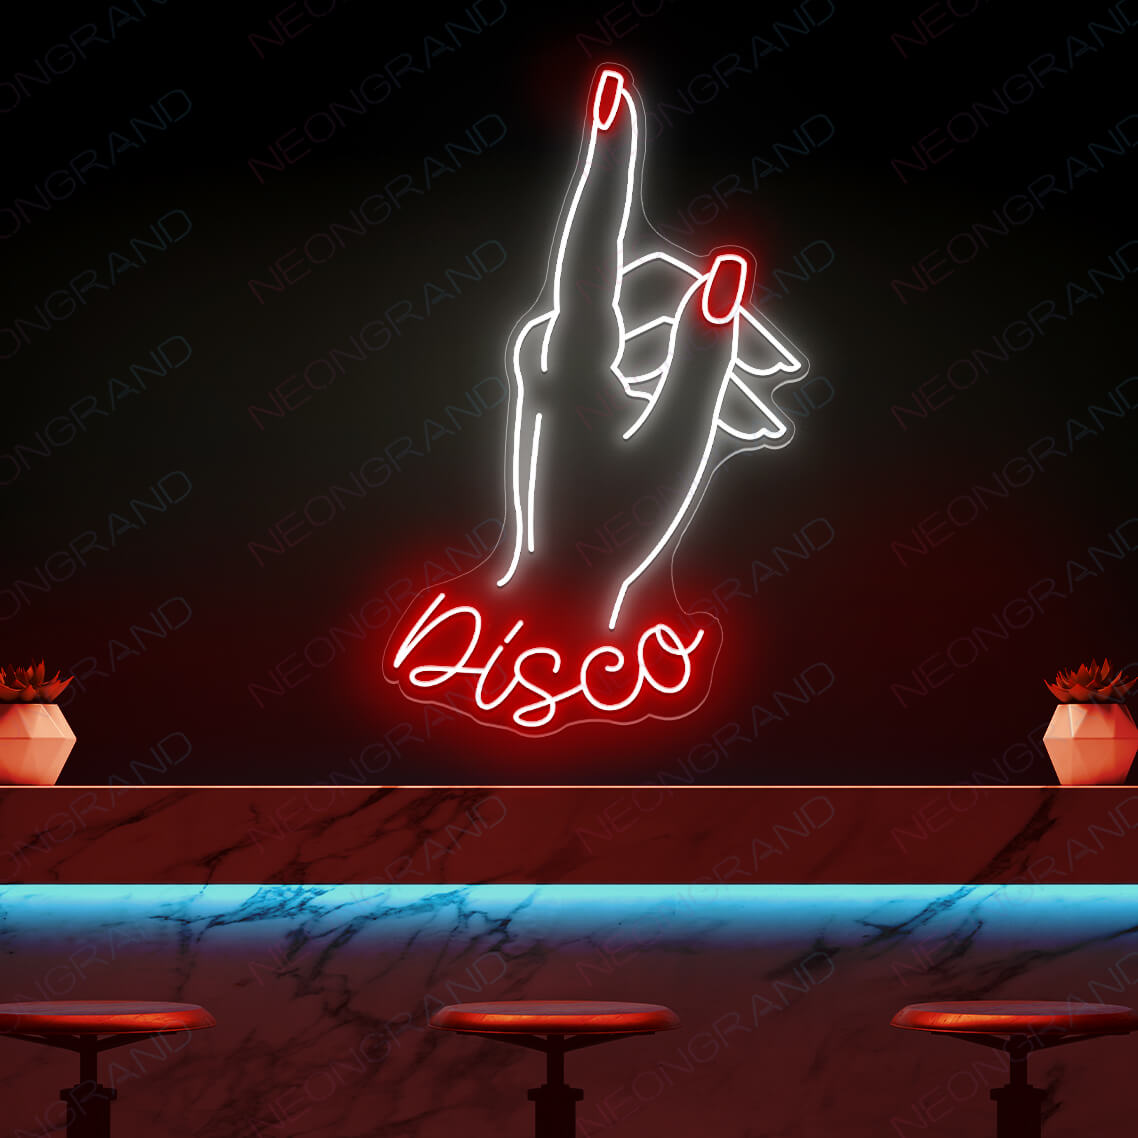 Disco Neon Sign Club Led Light red